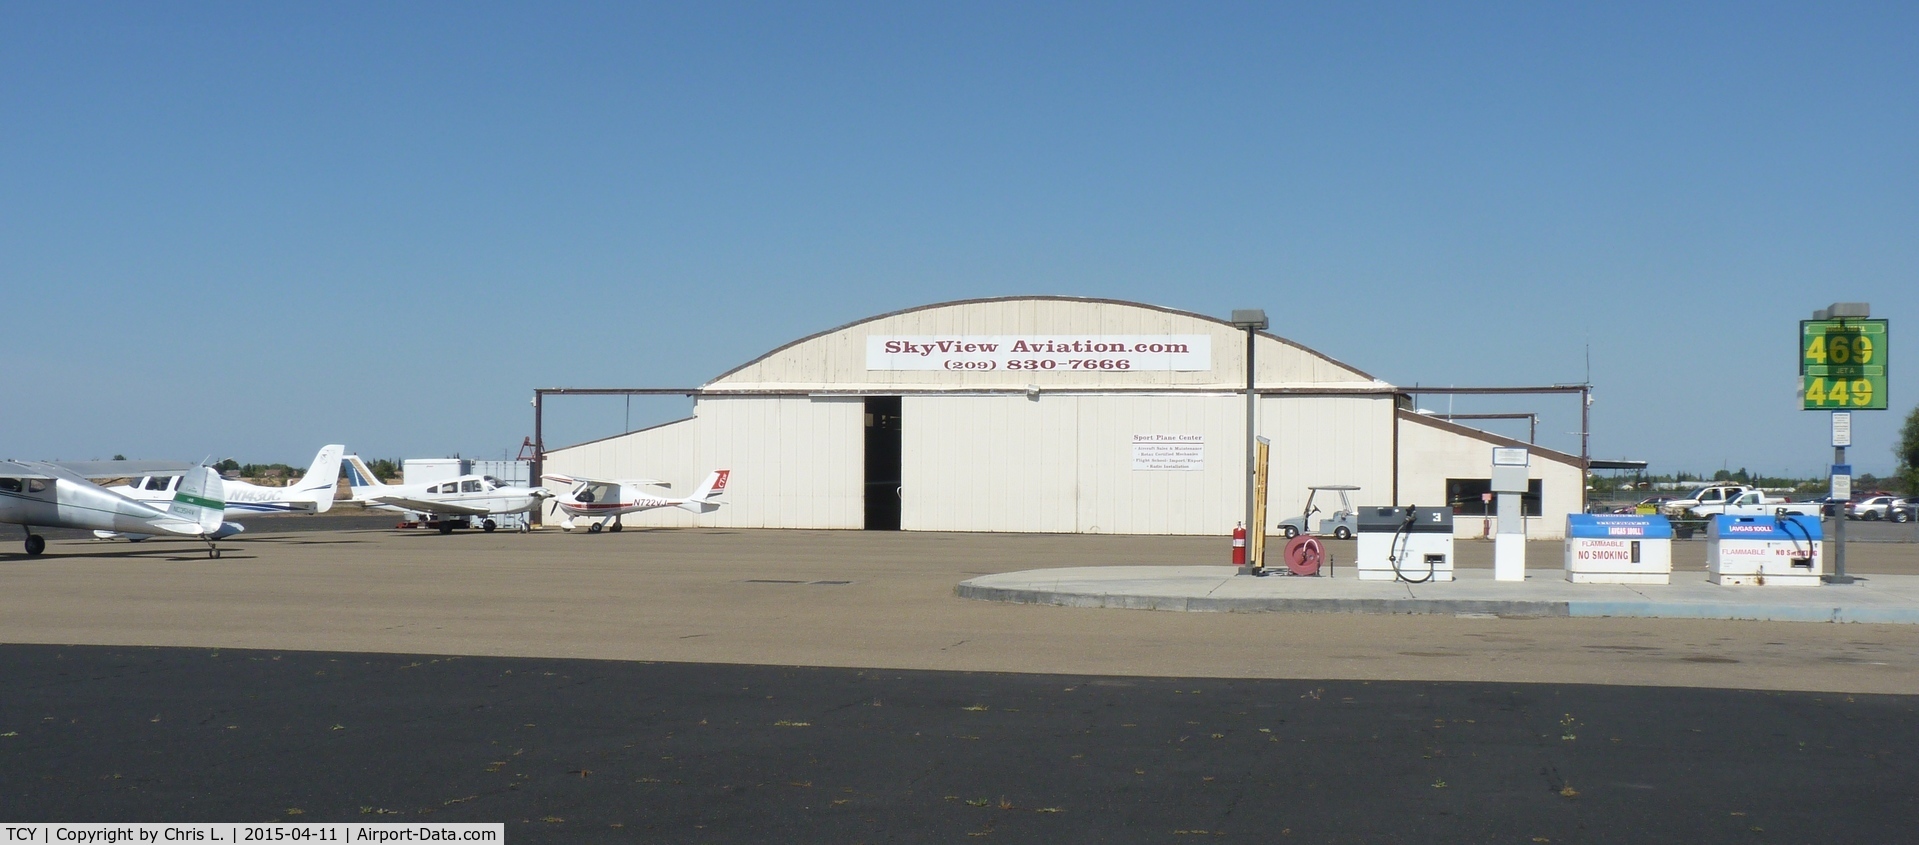 Tracy Municipal Airport (TCY) - One of the oldest and largest hangars at Tracy Municipal Airport, Skyview Aviation's hangar is the main FBO at Tracy.